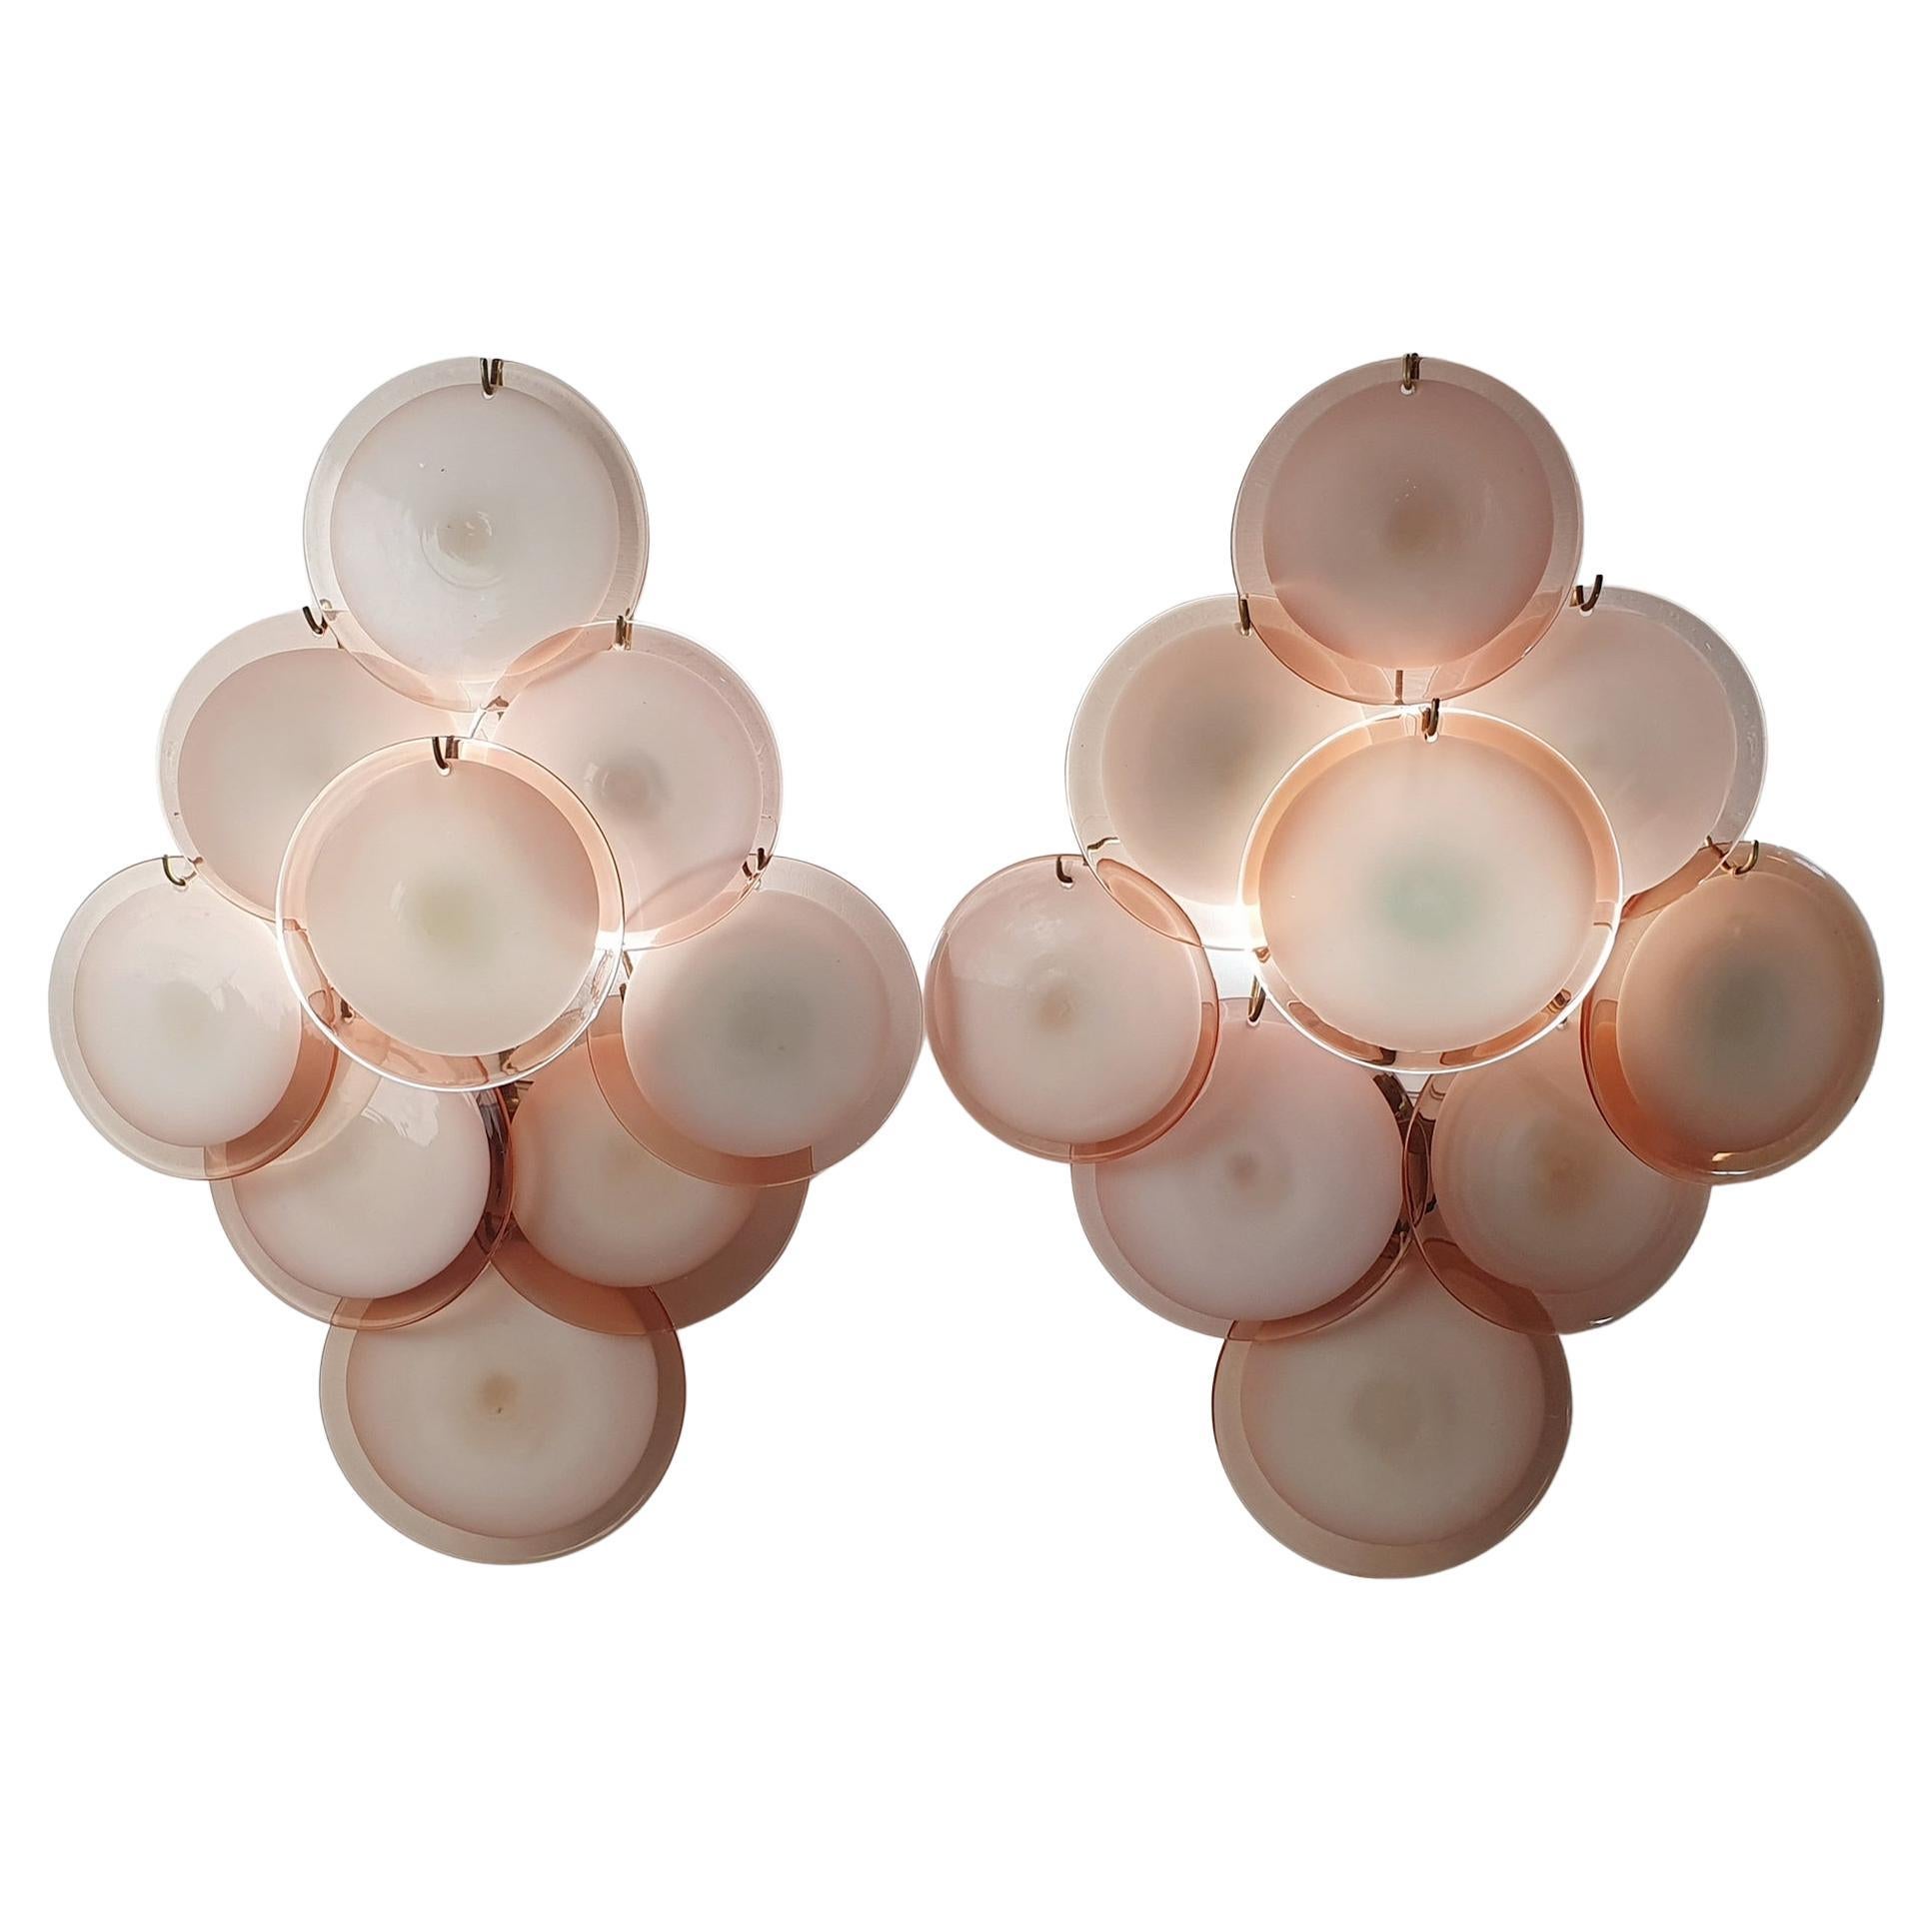 Pair of Vistosi Disc Wall Sconces, circa 1970 For Sale